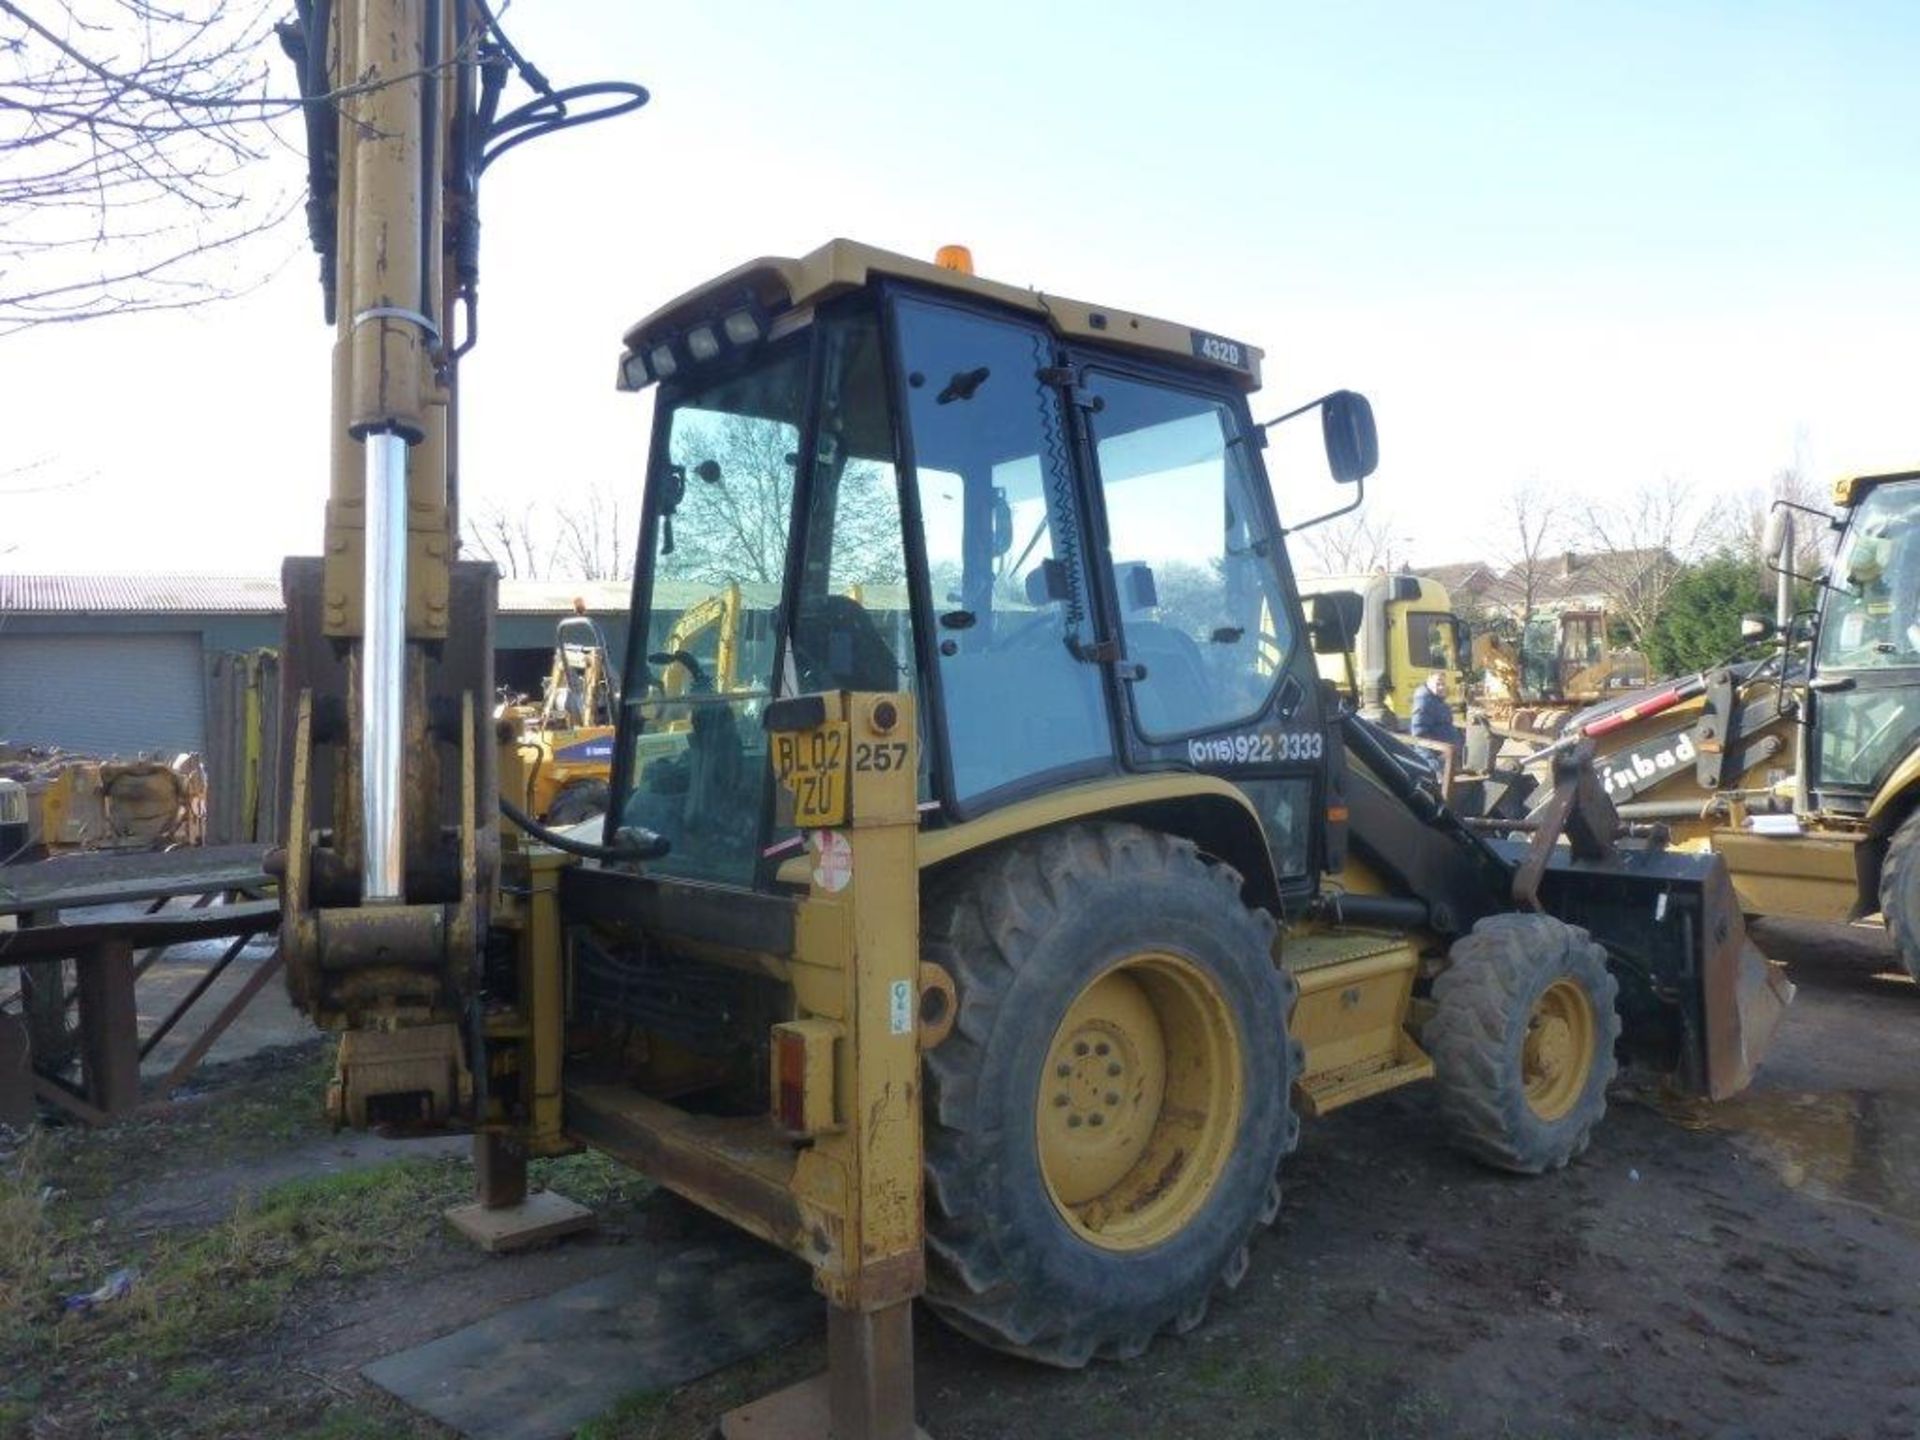 Caterpillar 432D 4x4 backhoe loader (2002), indicated hours 6393.2, PIN no. CAT0432DCBLD01714, - Image 3 of 6